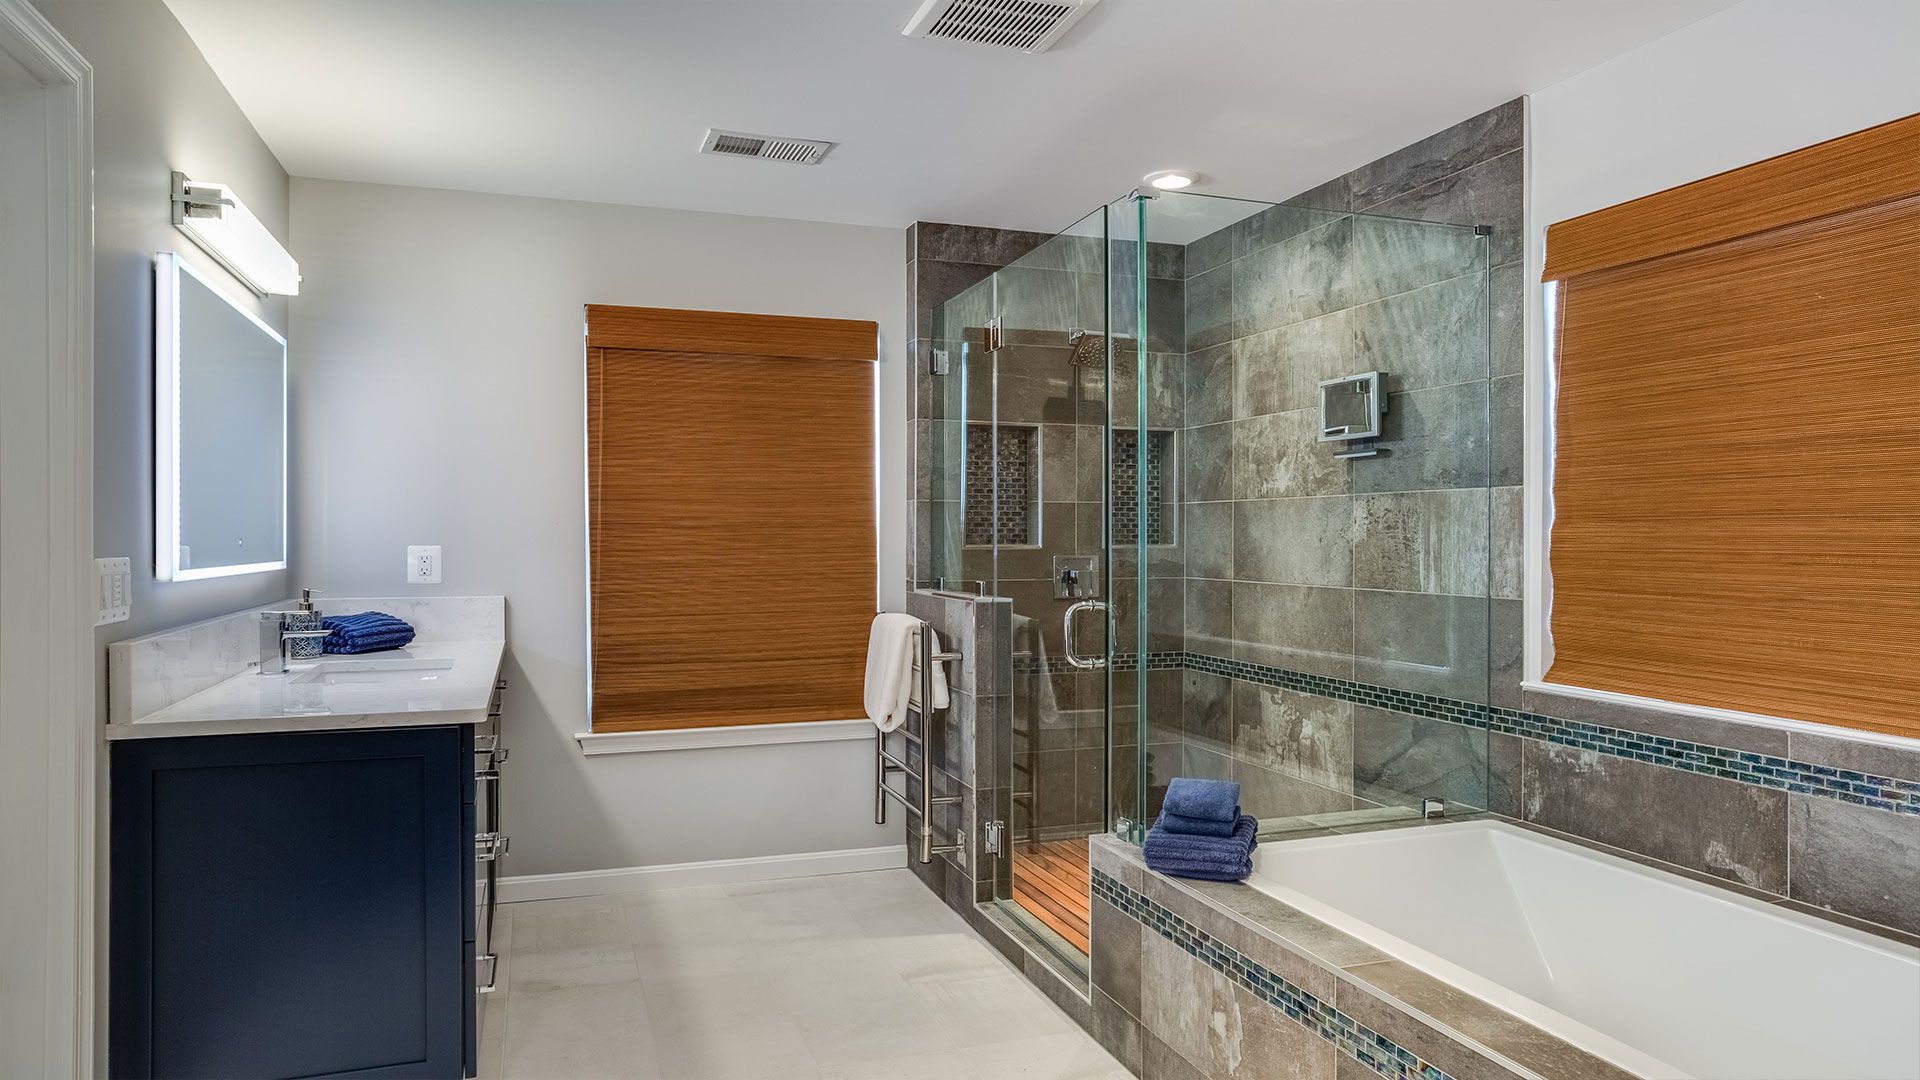 Bathroom Remodeling Services Staten Island NY